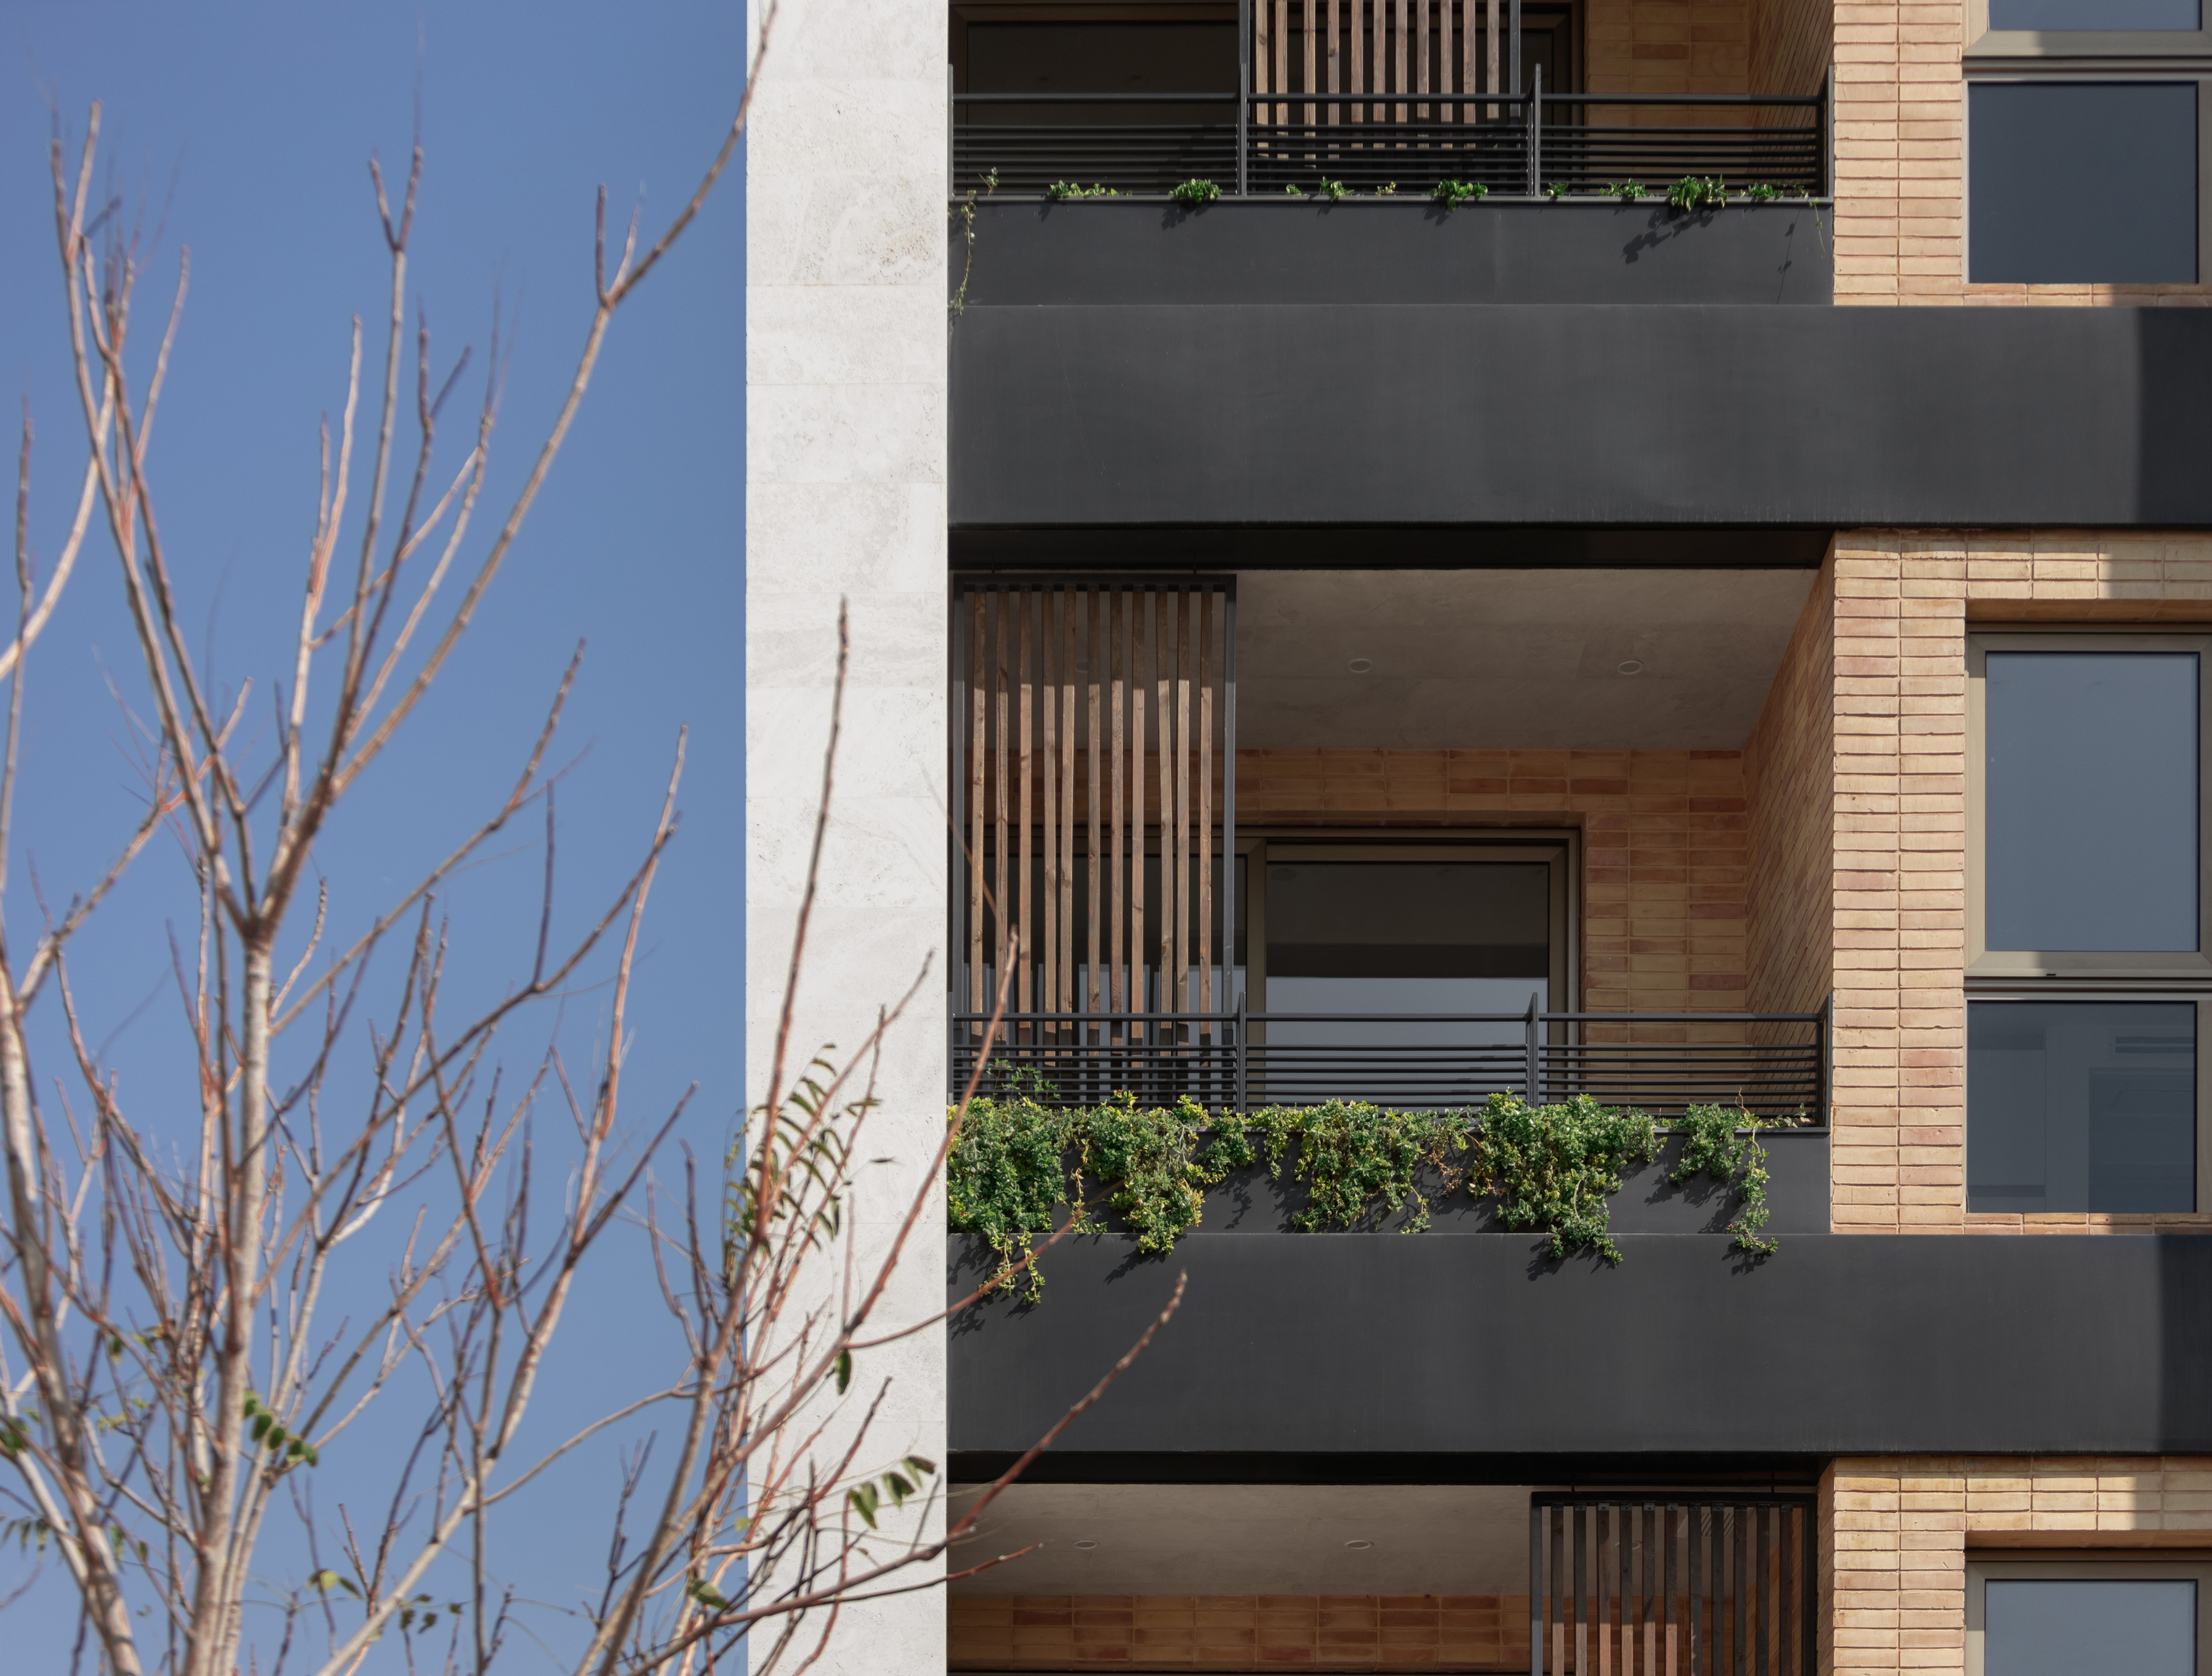 picture no. 4 ofApartment No. 05 project, designed by Ahmad Ghodsimanesh & Partners